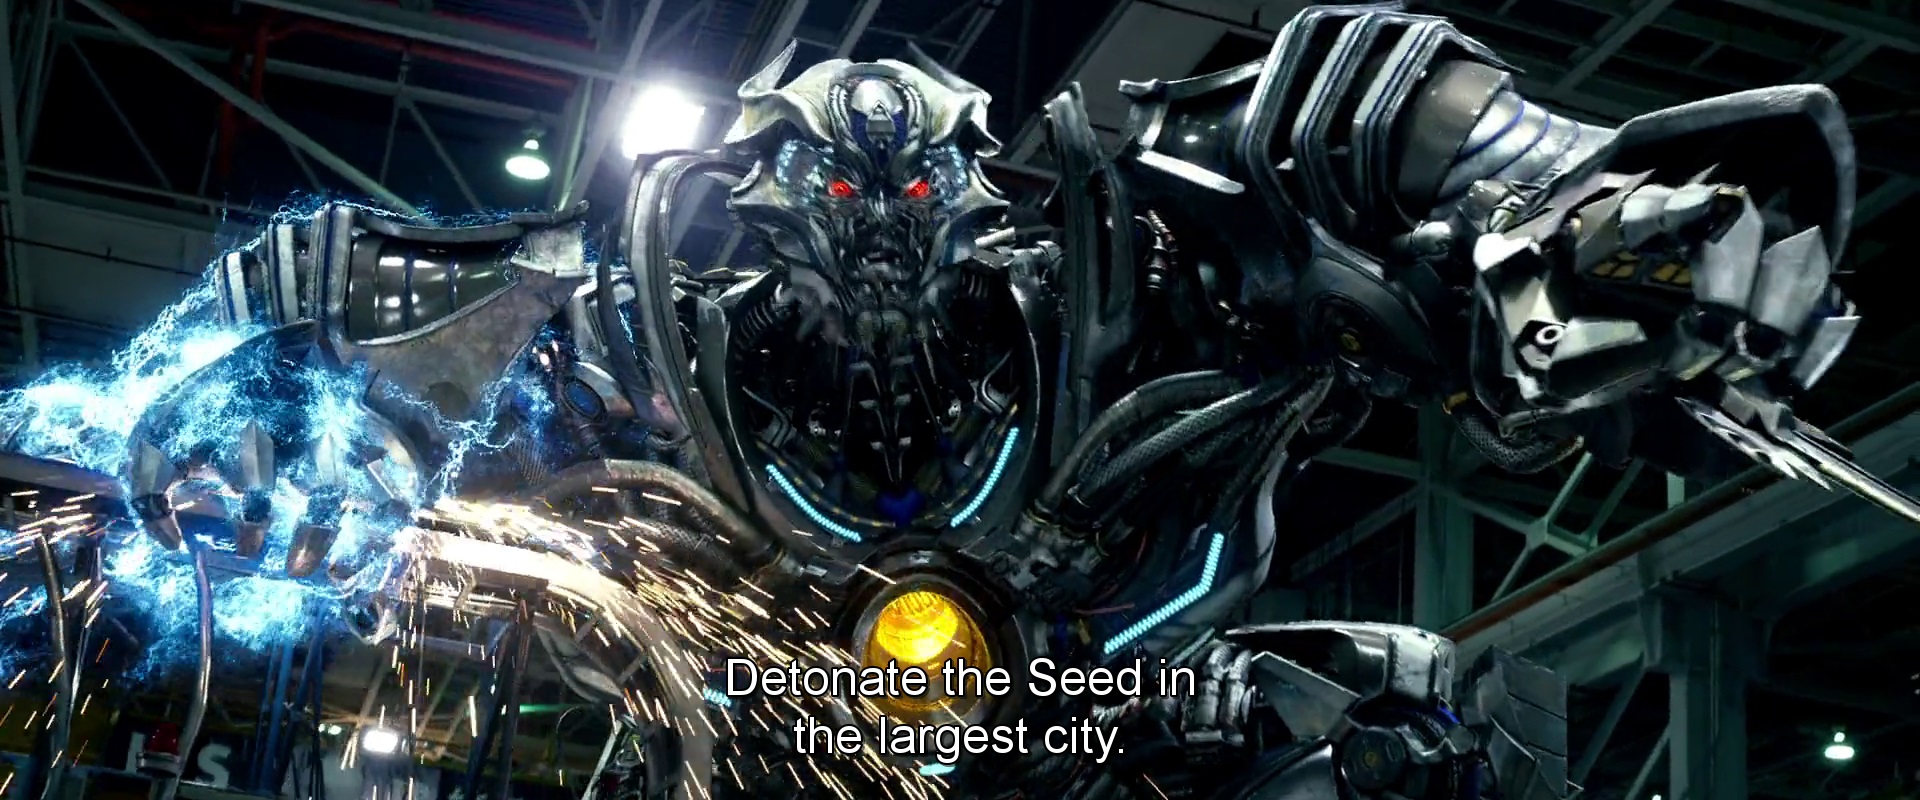 Transformers 4 New Lead Cast? Also, Hugo Weaving on Voicing Megatron